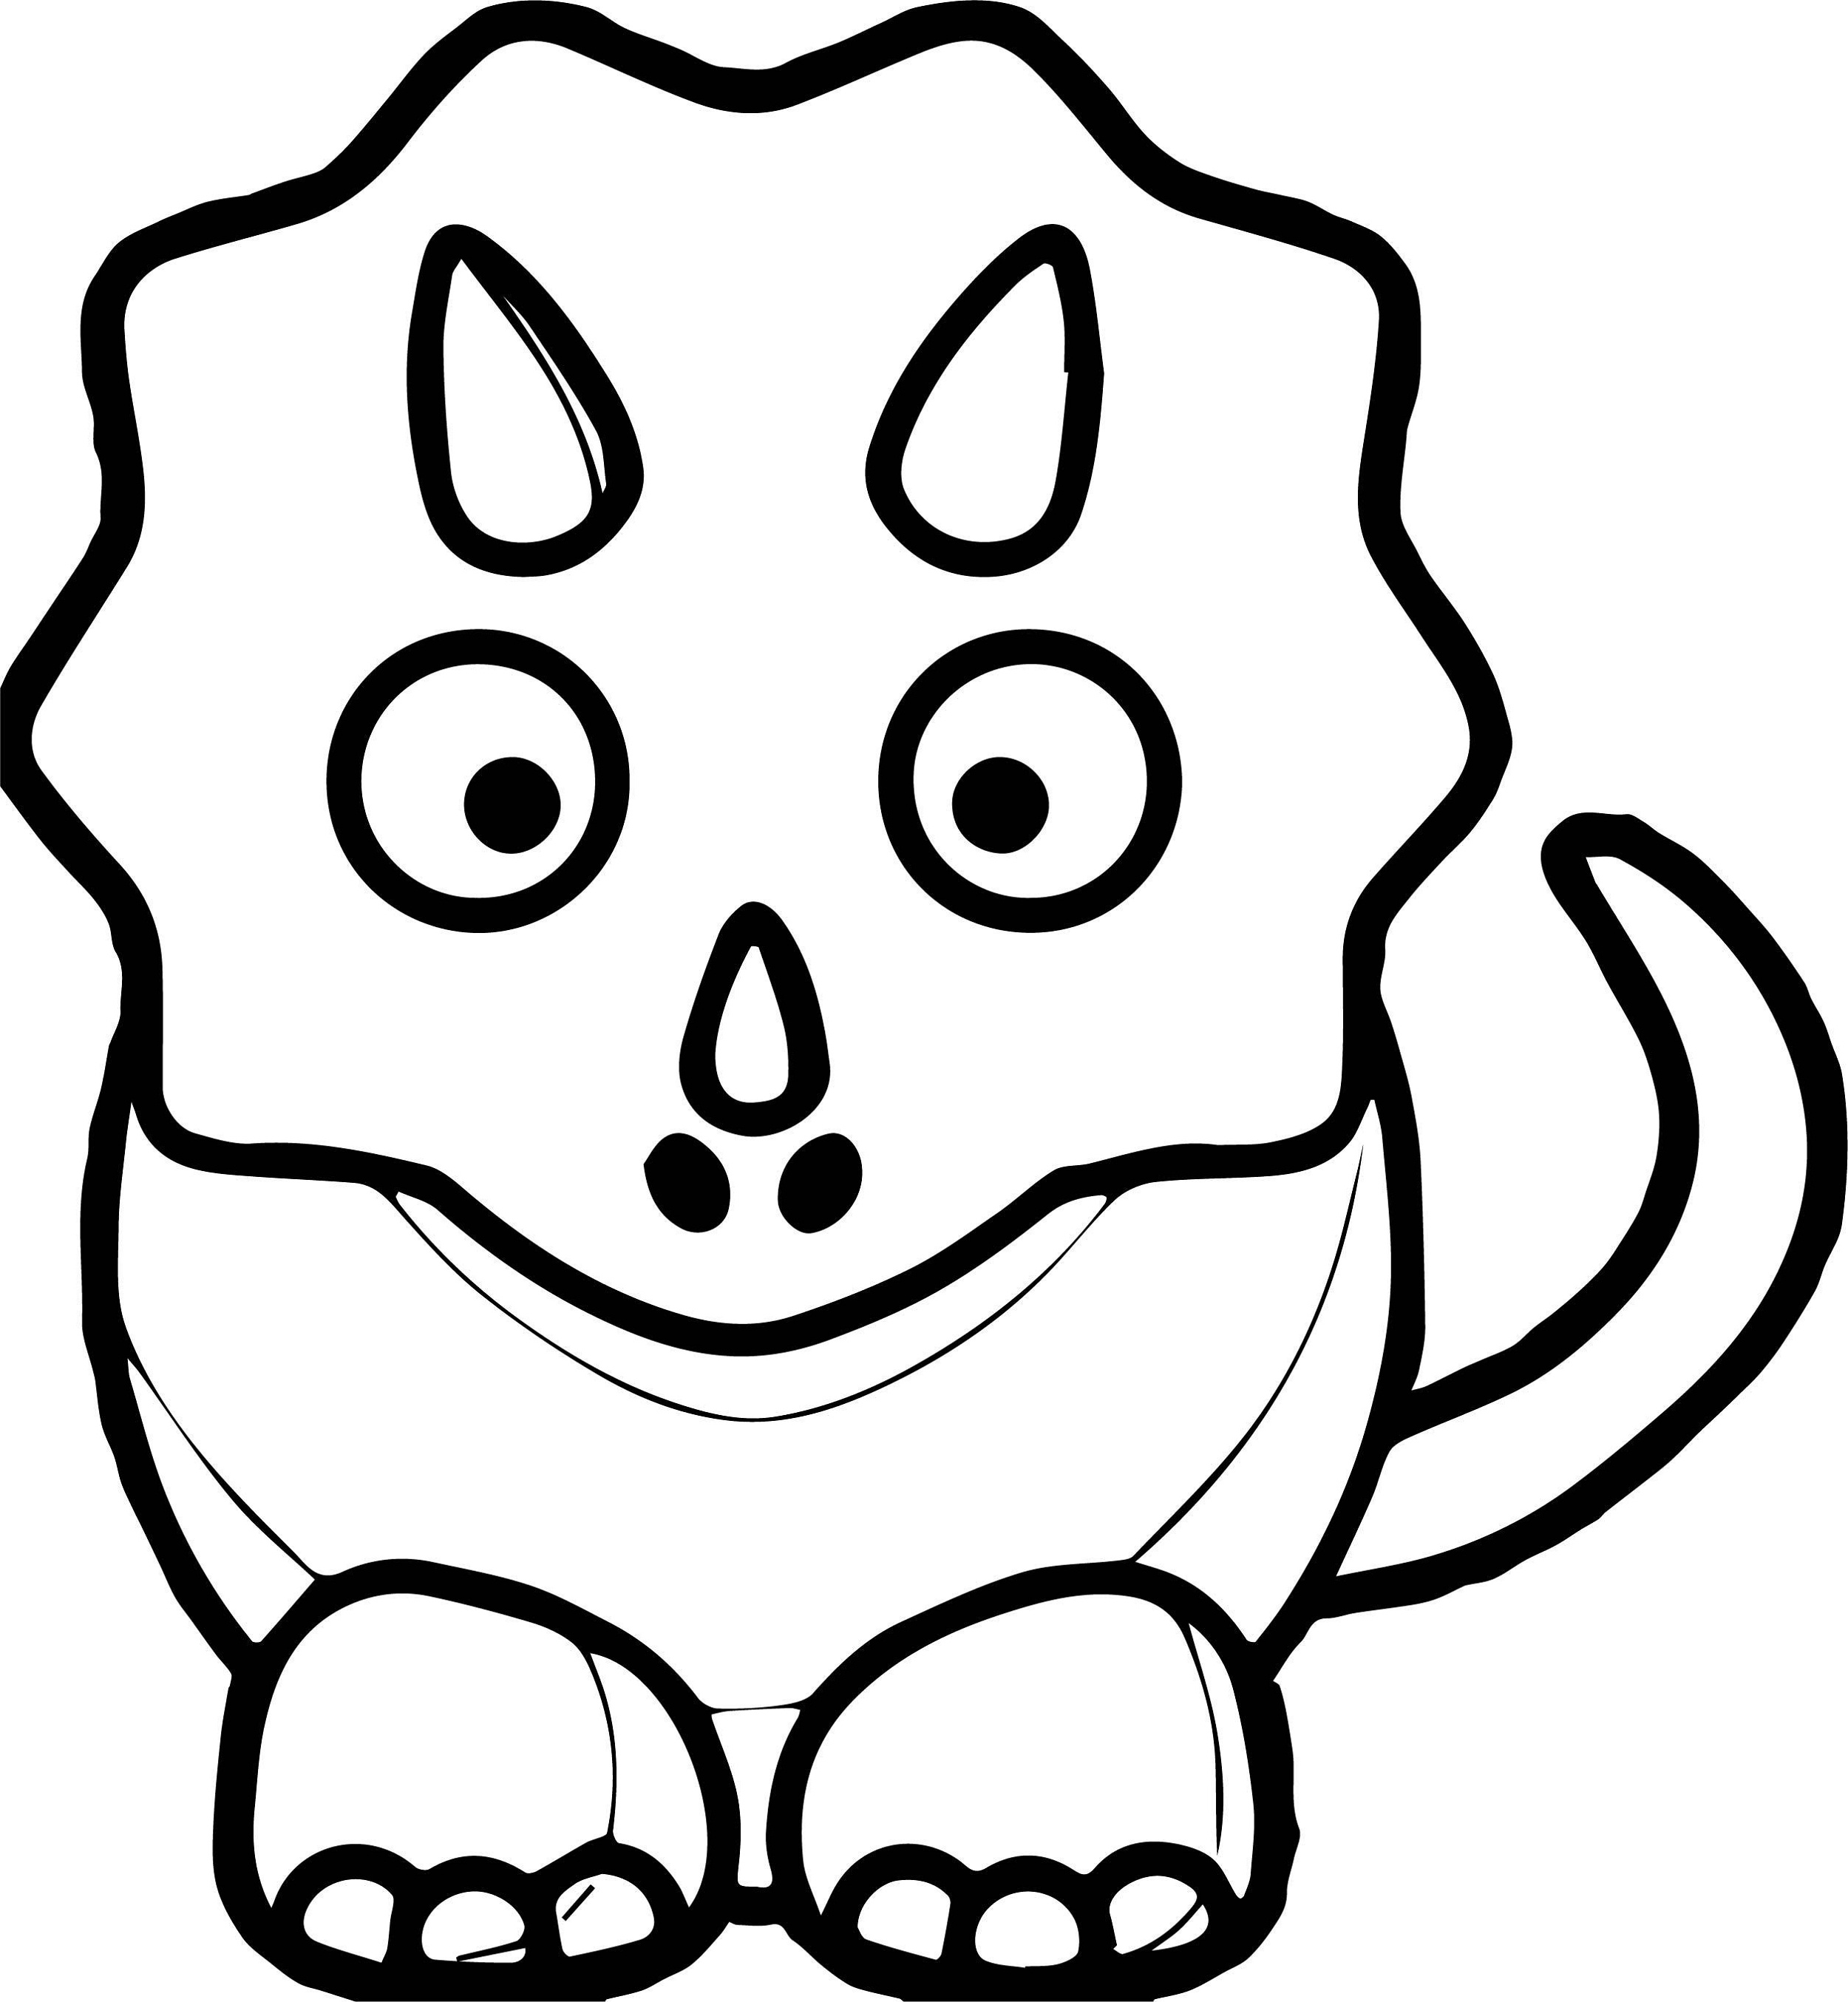 baby-dinosaur-coloring-pages-for-preschoolers-activity-shelter